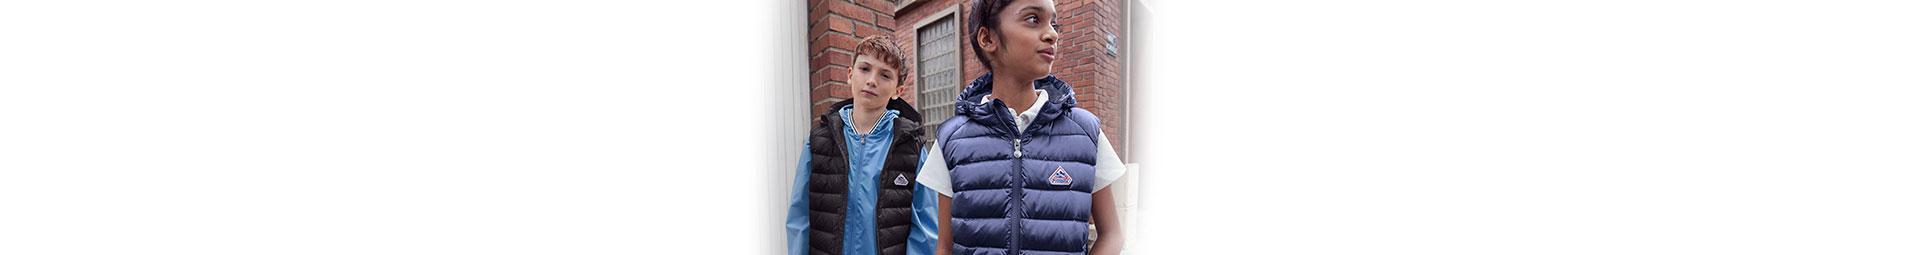 Windbreaker, down jacket, t-shirt and pullover | New Kid collection